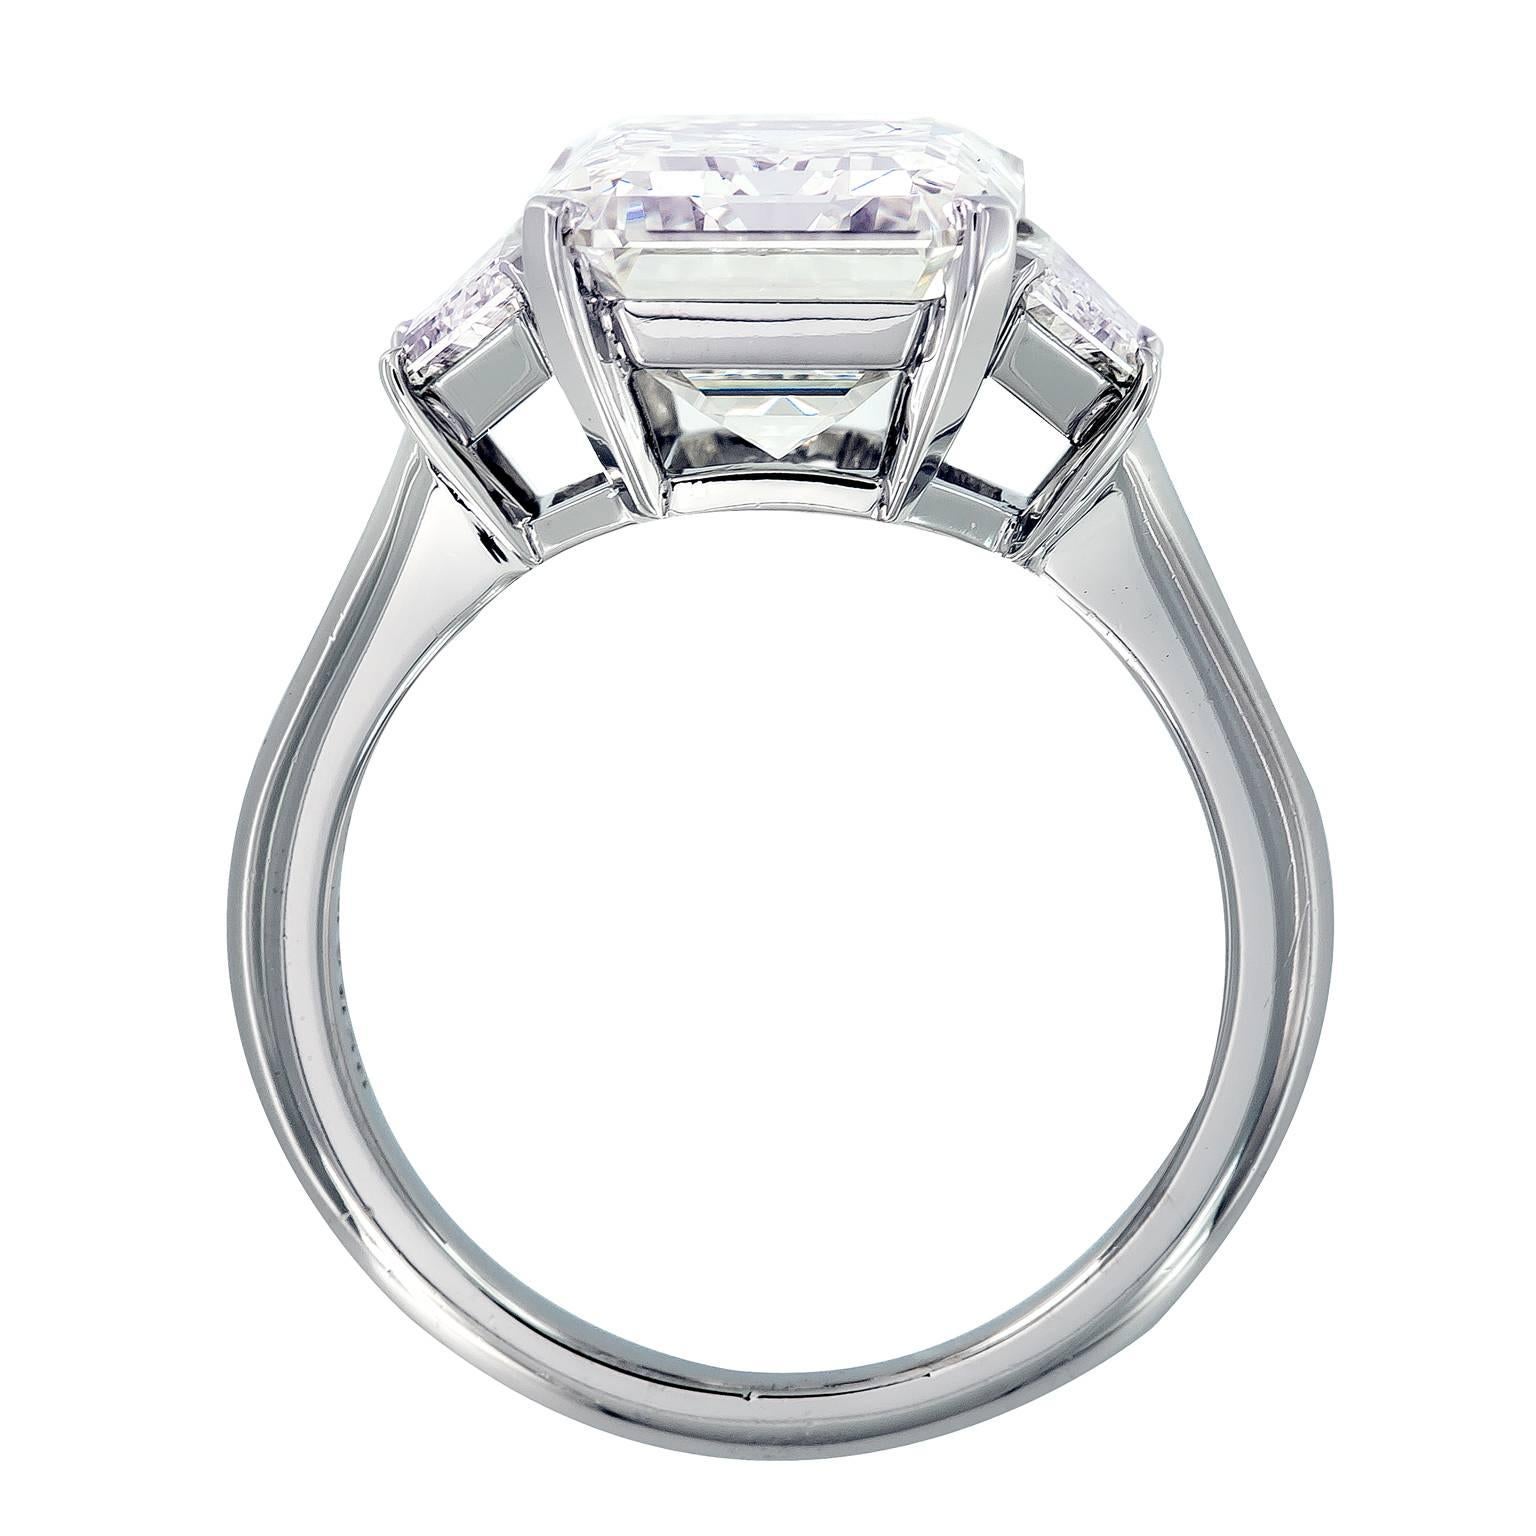 Classic hand-fabricated platinum engagement ring centers around a showstopping 5.51 carat emerald cut diamond accented with two step cut trapezoid diamonds. Ring size 6.25, 11 mm at top, 2.5 mm shank

5.51 Carat Emerald Cut VVS2/J
2 Step Cut